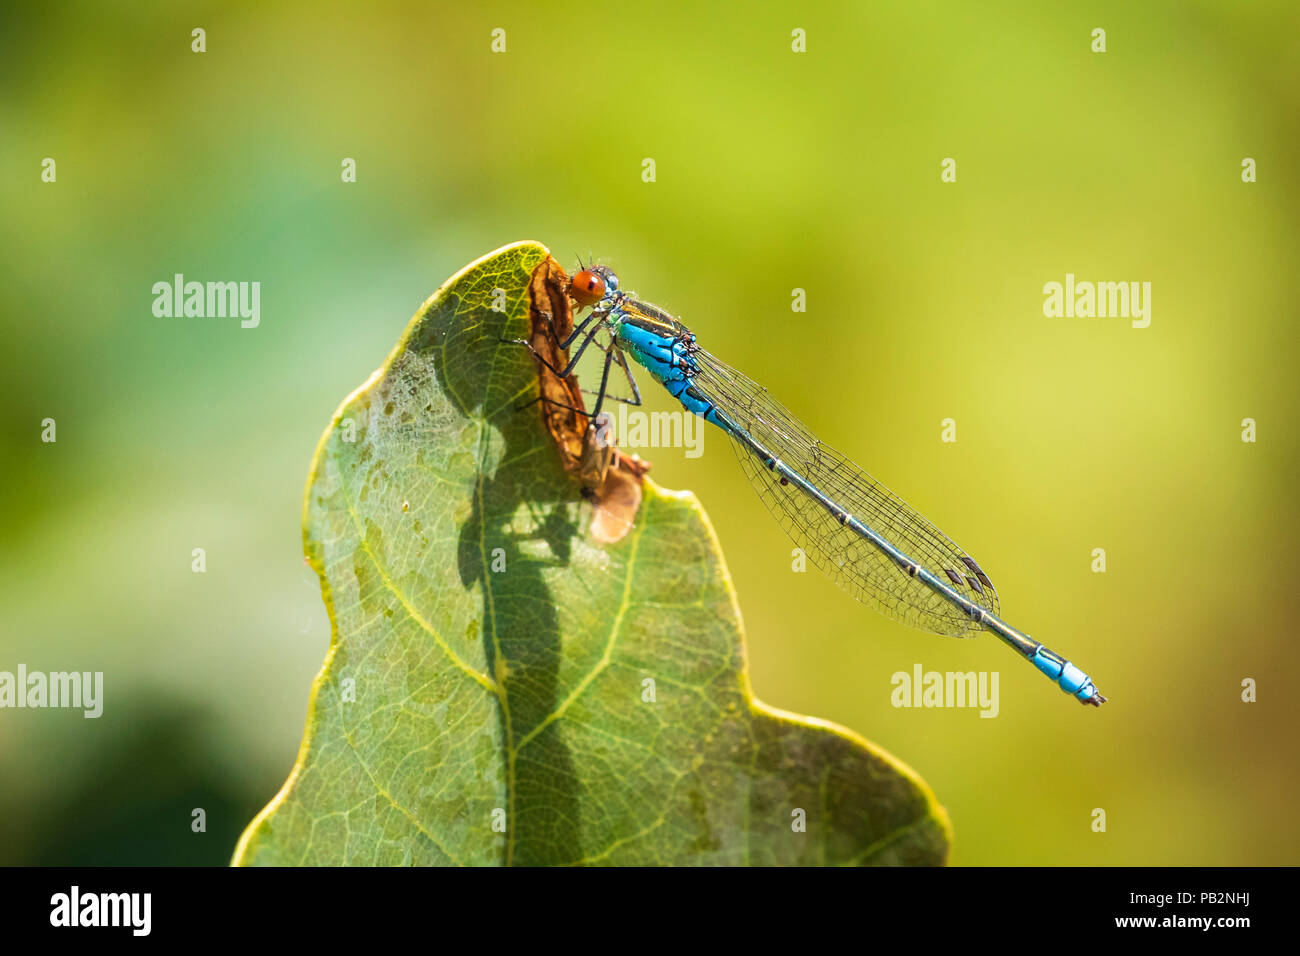 Closeup of a small red-eyed damselfly Erythromma viridulum perched in a forest. A blue specie with red eyes. Stock Photo